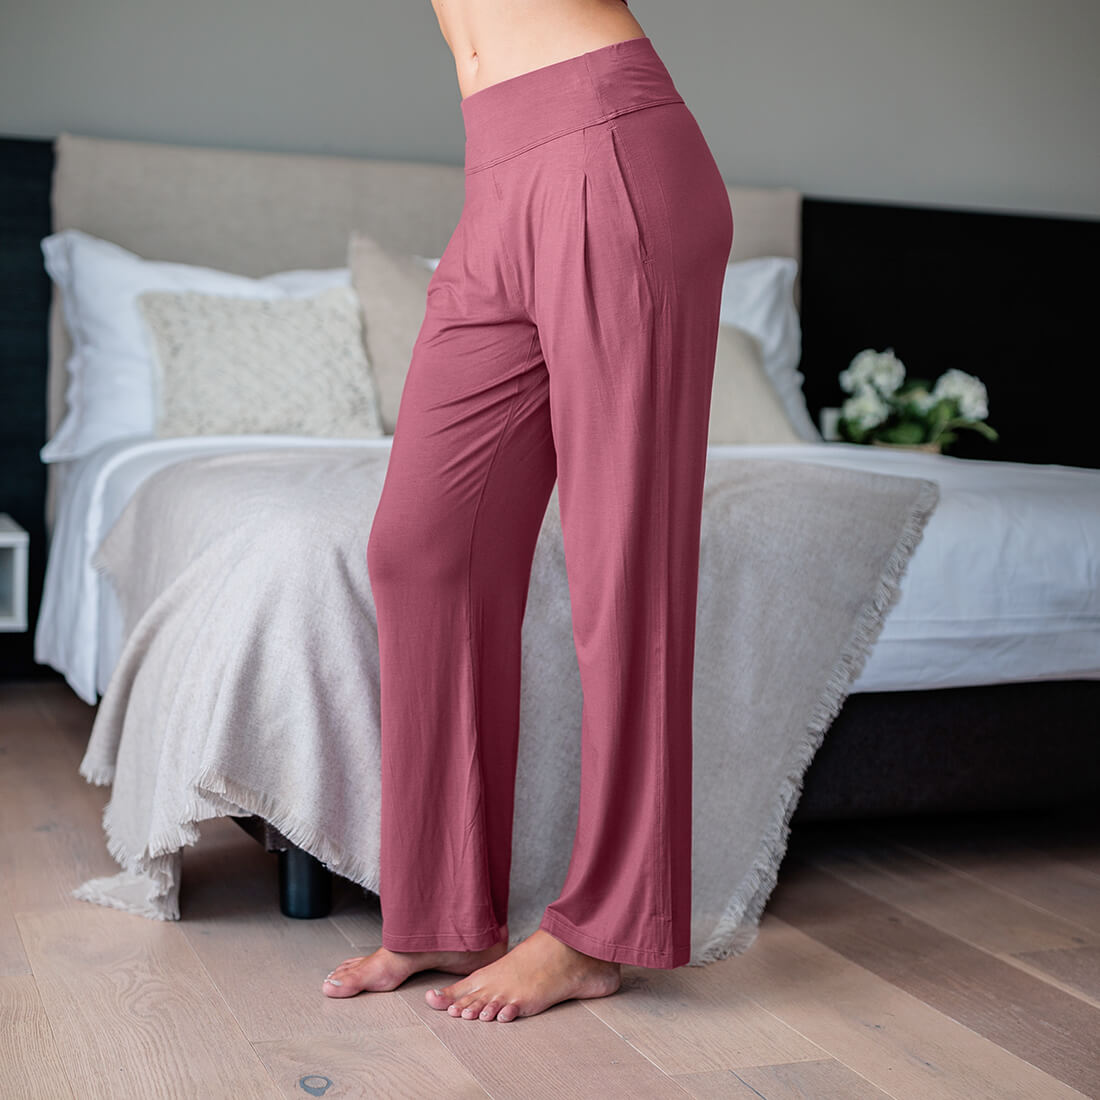 The best pajamas for women  DAGSMEJAN – tagged bottoms